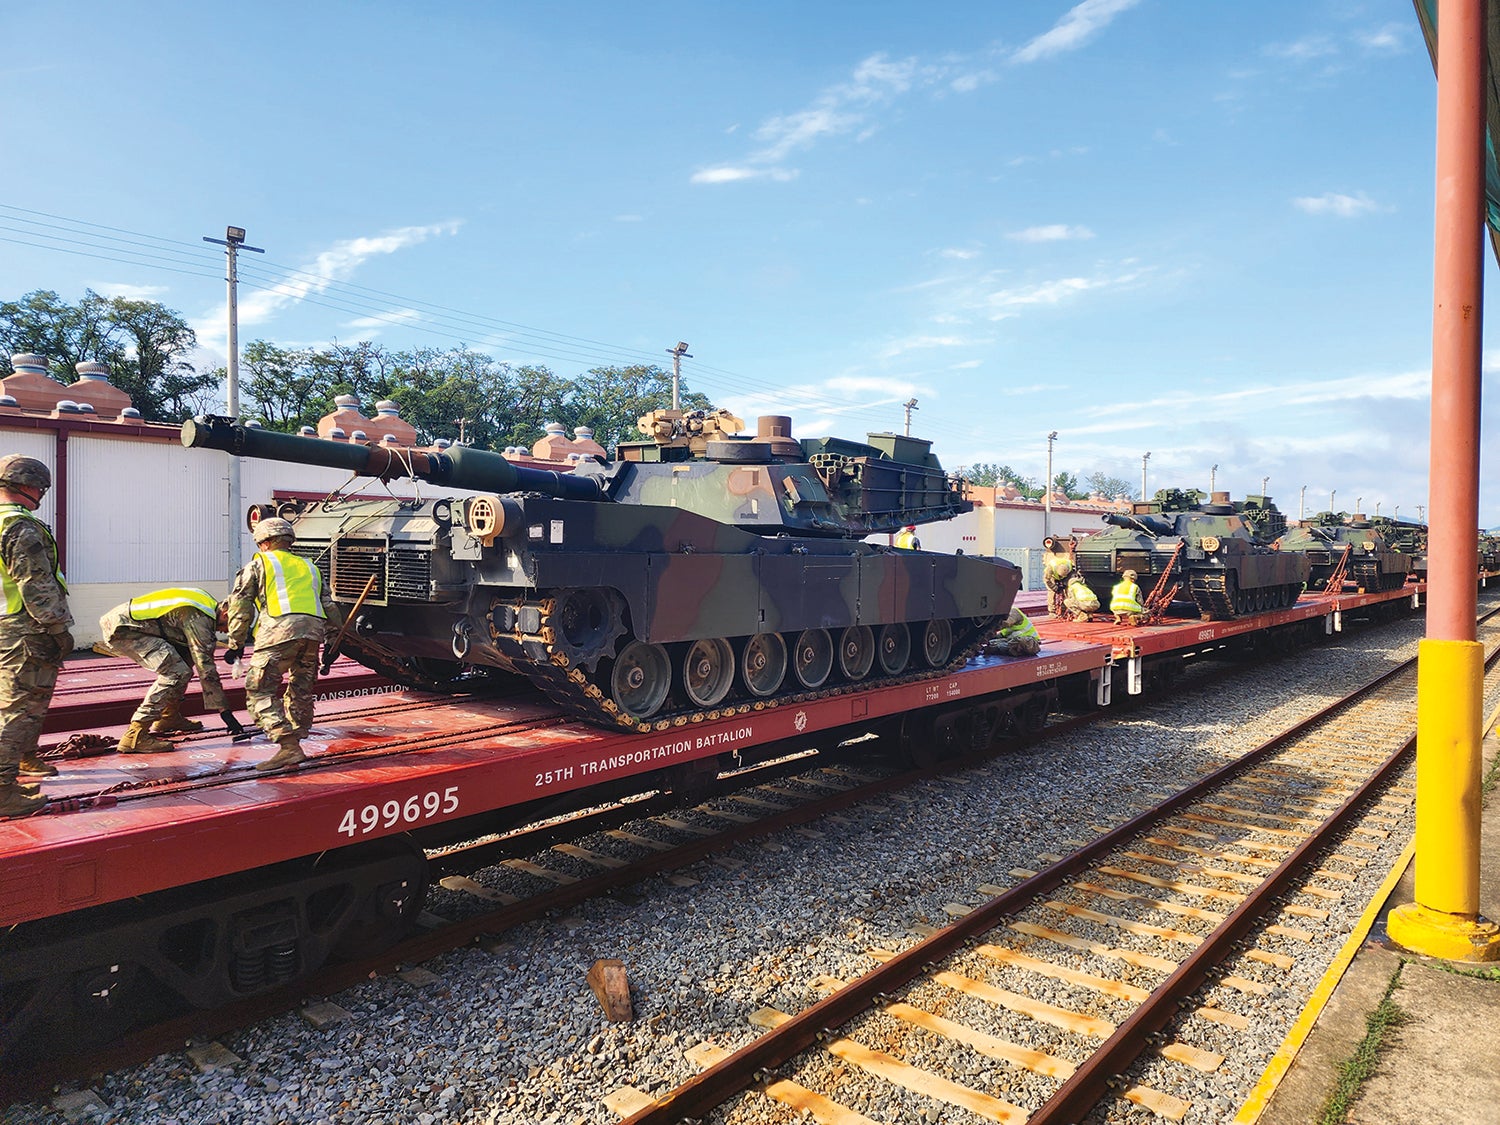 Soldiers from the 1st Battalion, 77th Armor Regiment, prepare equipment to be transported from Camp Carroll to Camp Casey, both in South Korea. (Credit: U.S. Army/Capt. Nathan Mumford)